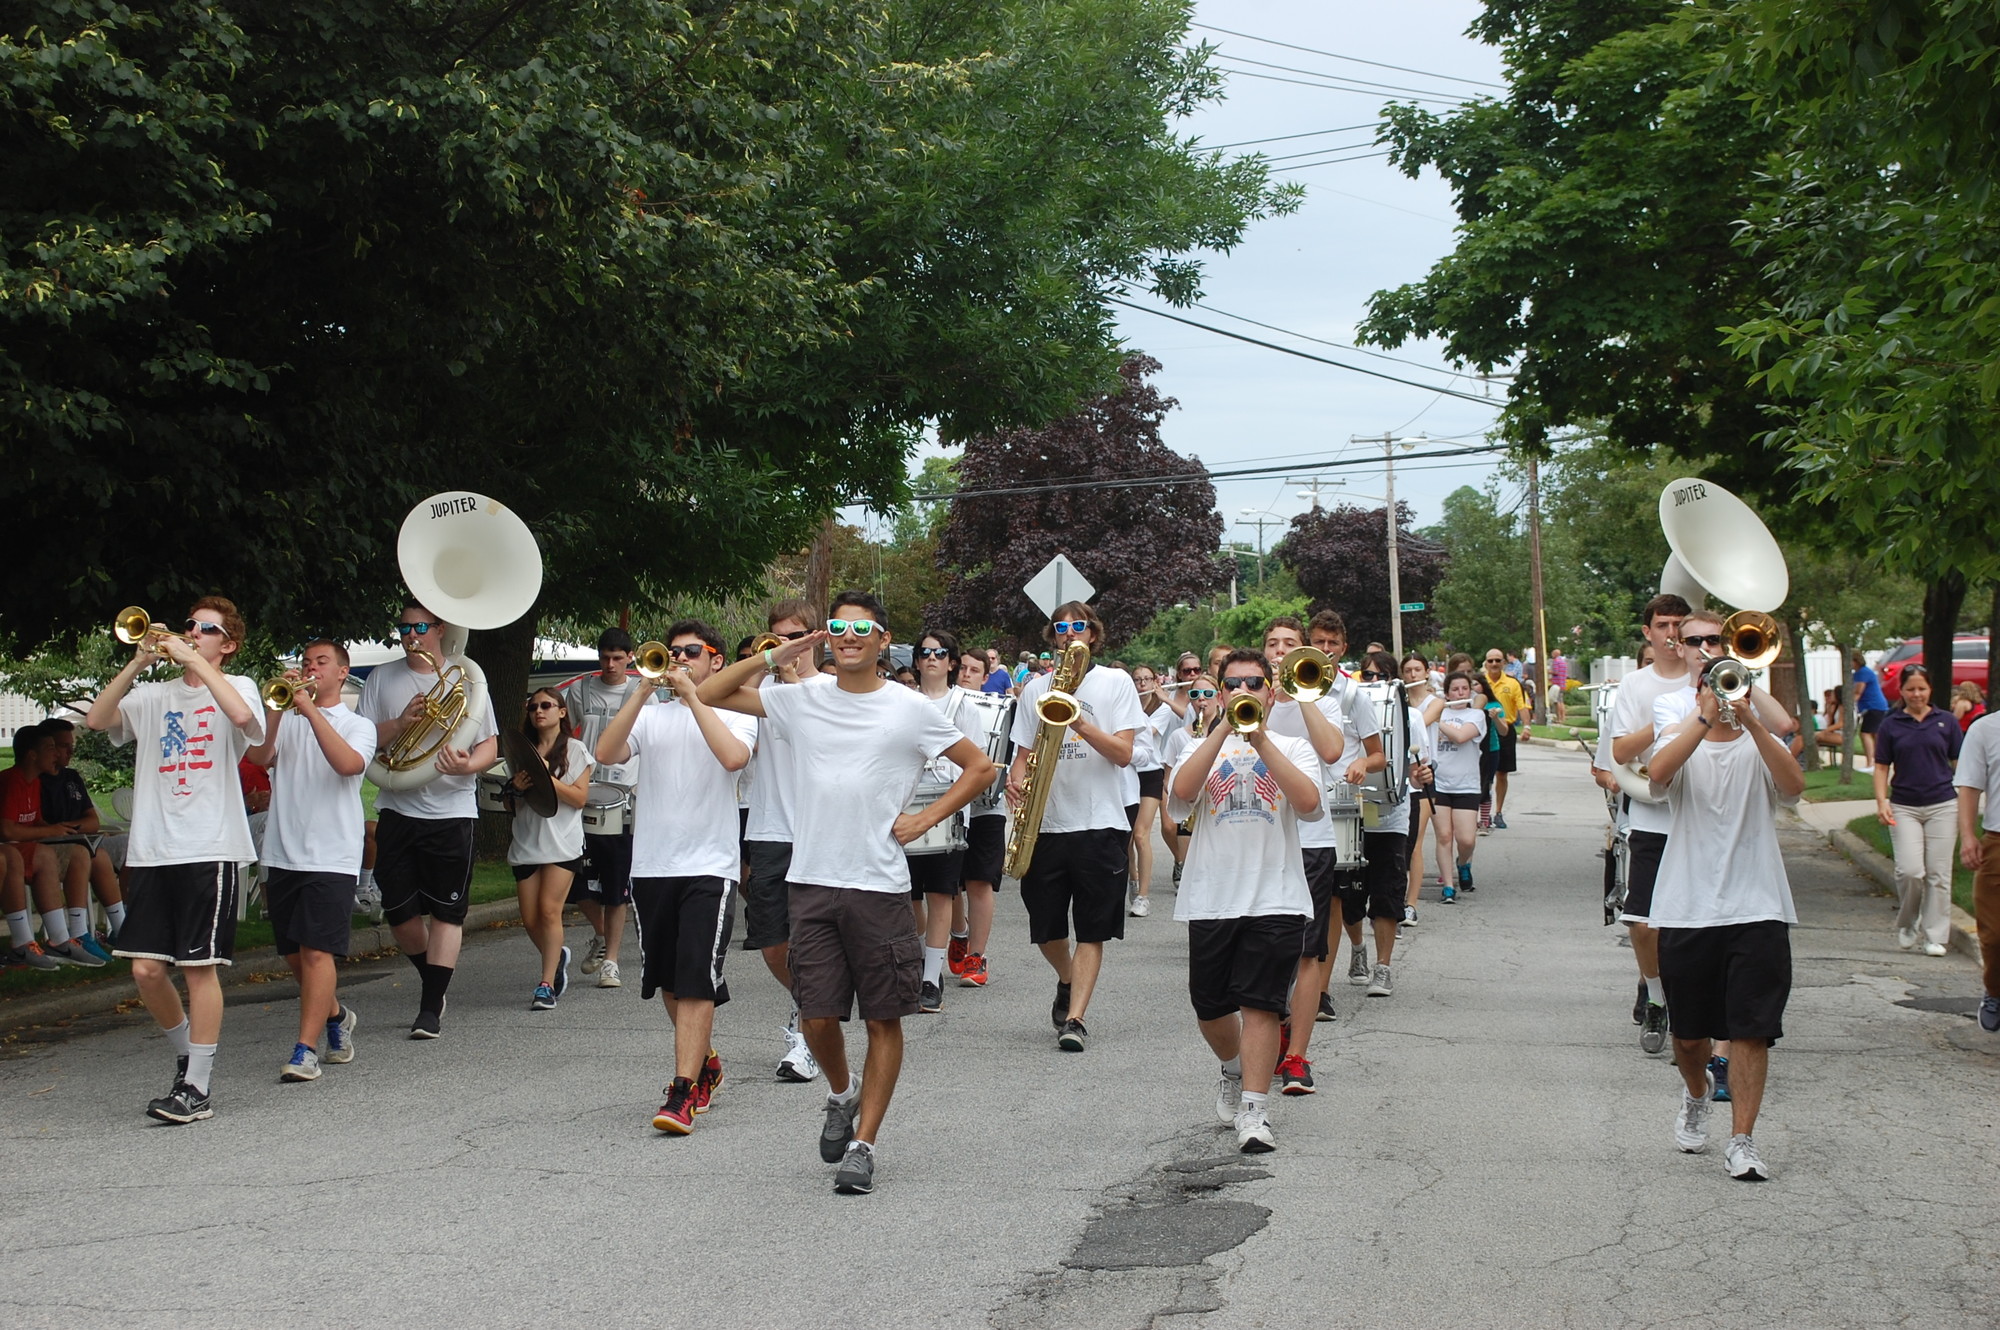 The Wantagh High School marching band played patriotic tunes.